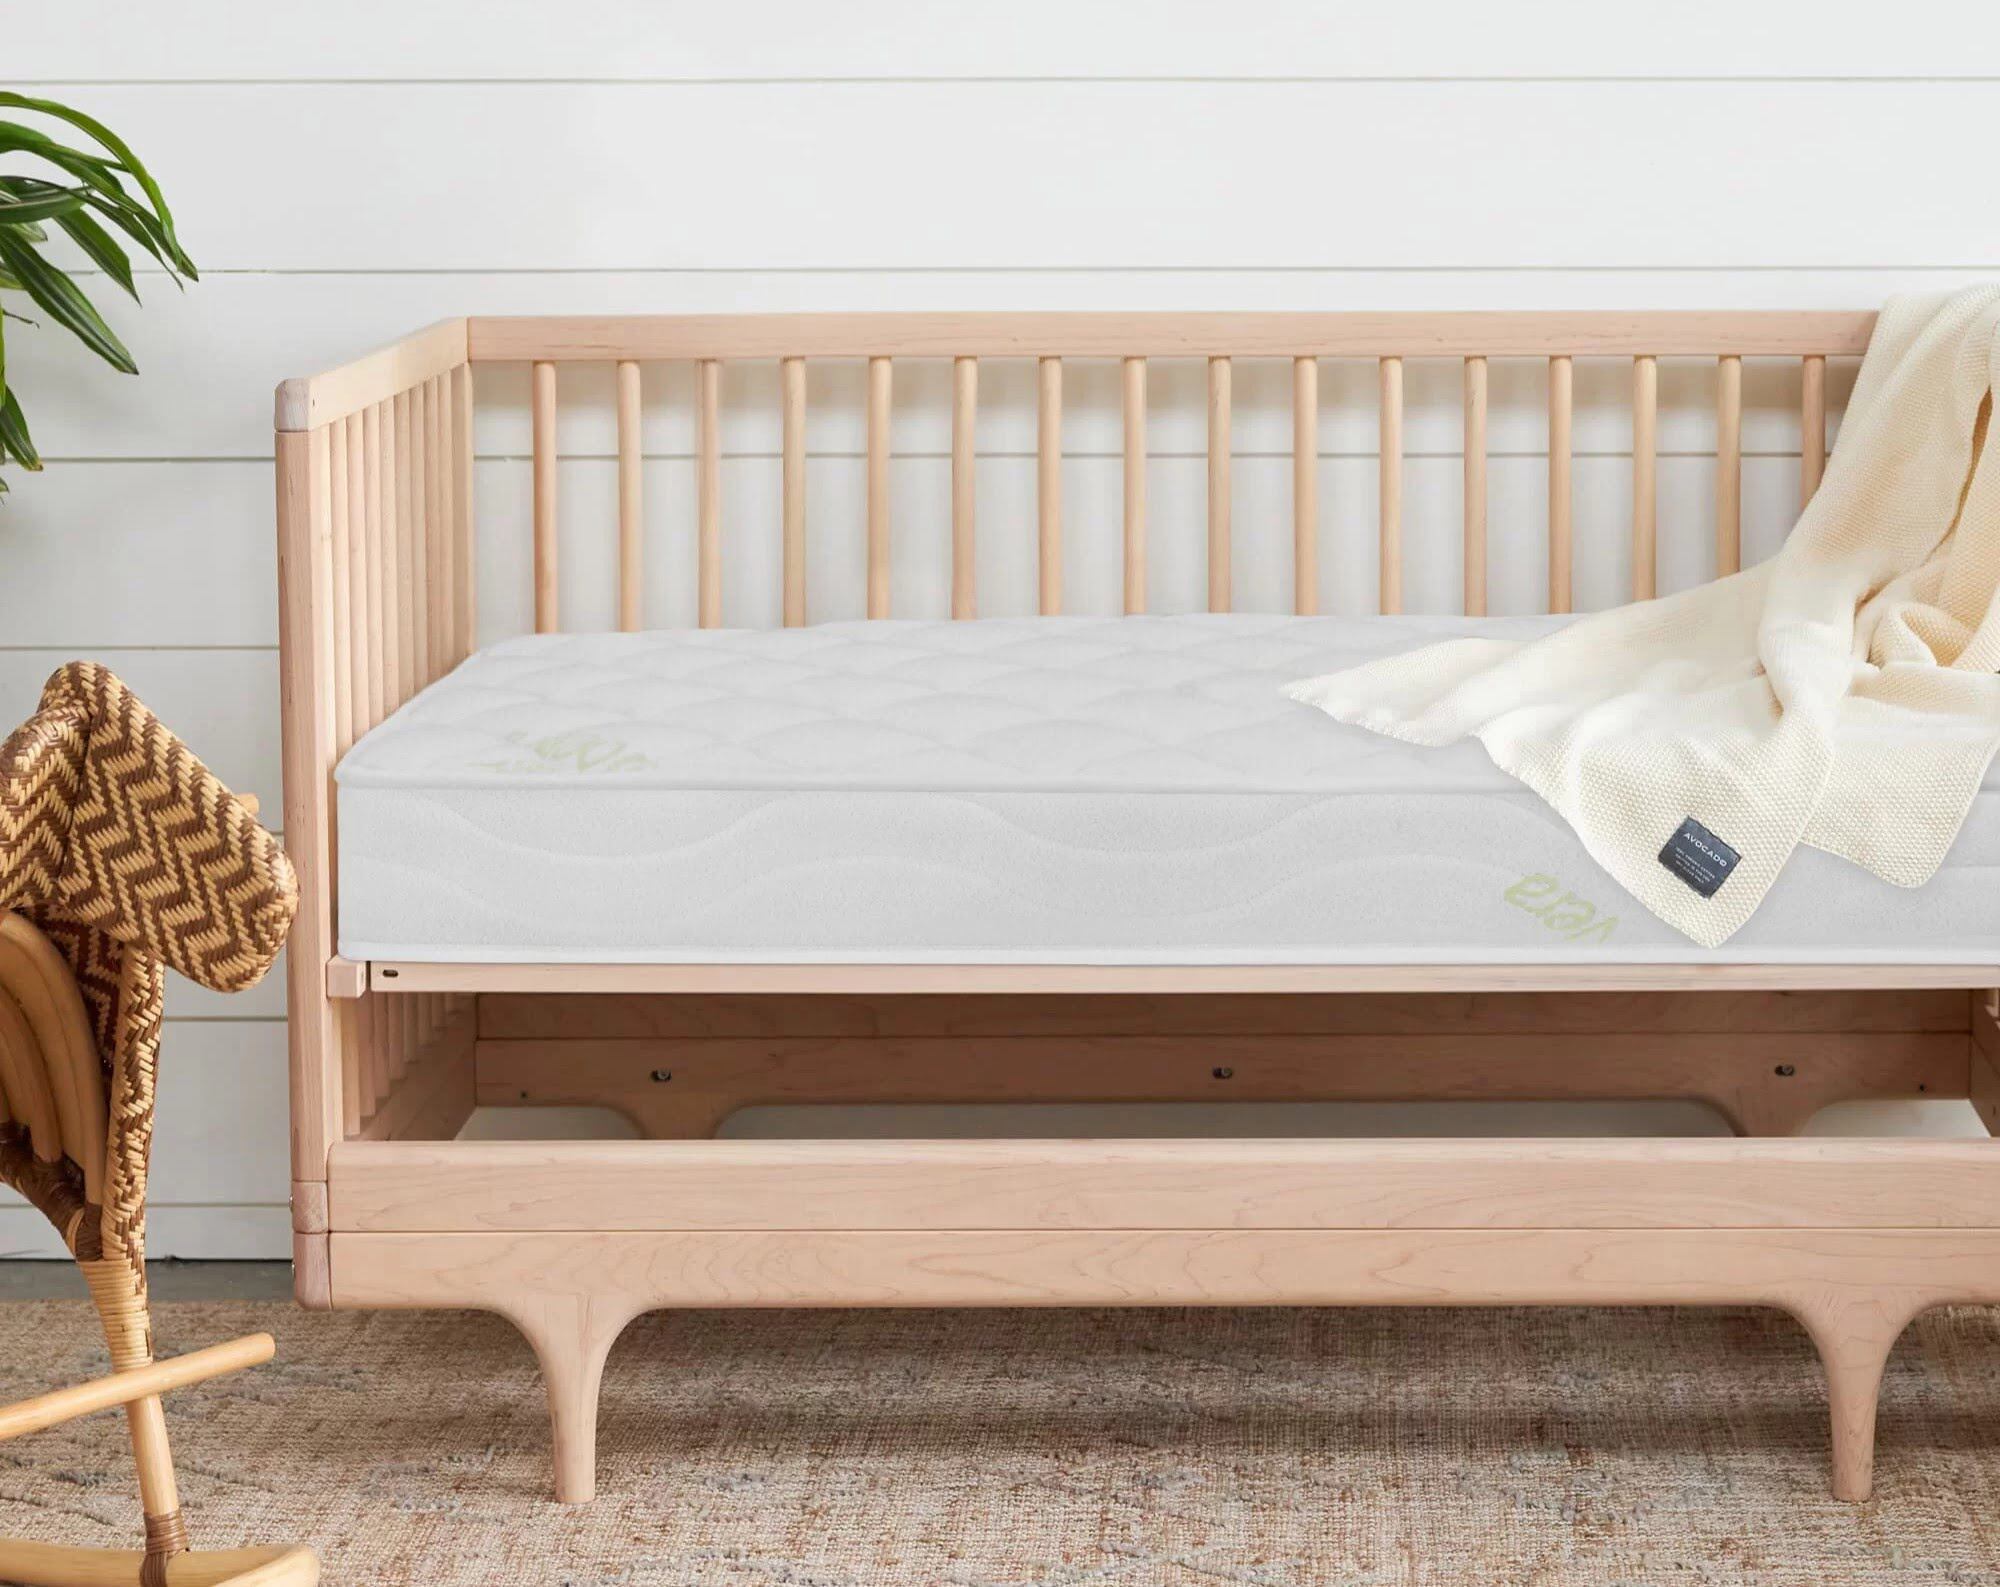 Crib Mattress Review: The Best Options for Your Baby’s Comfort